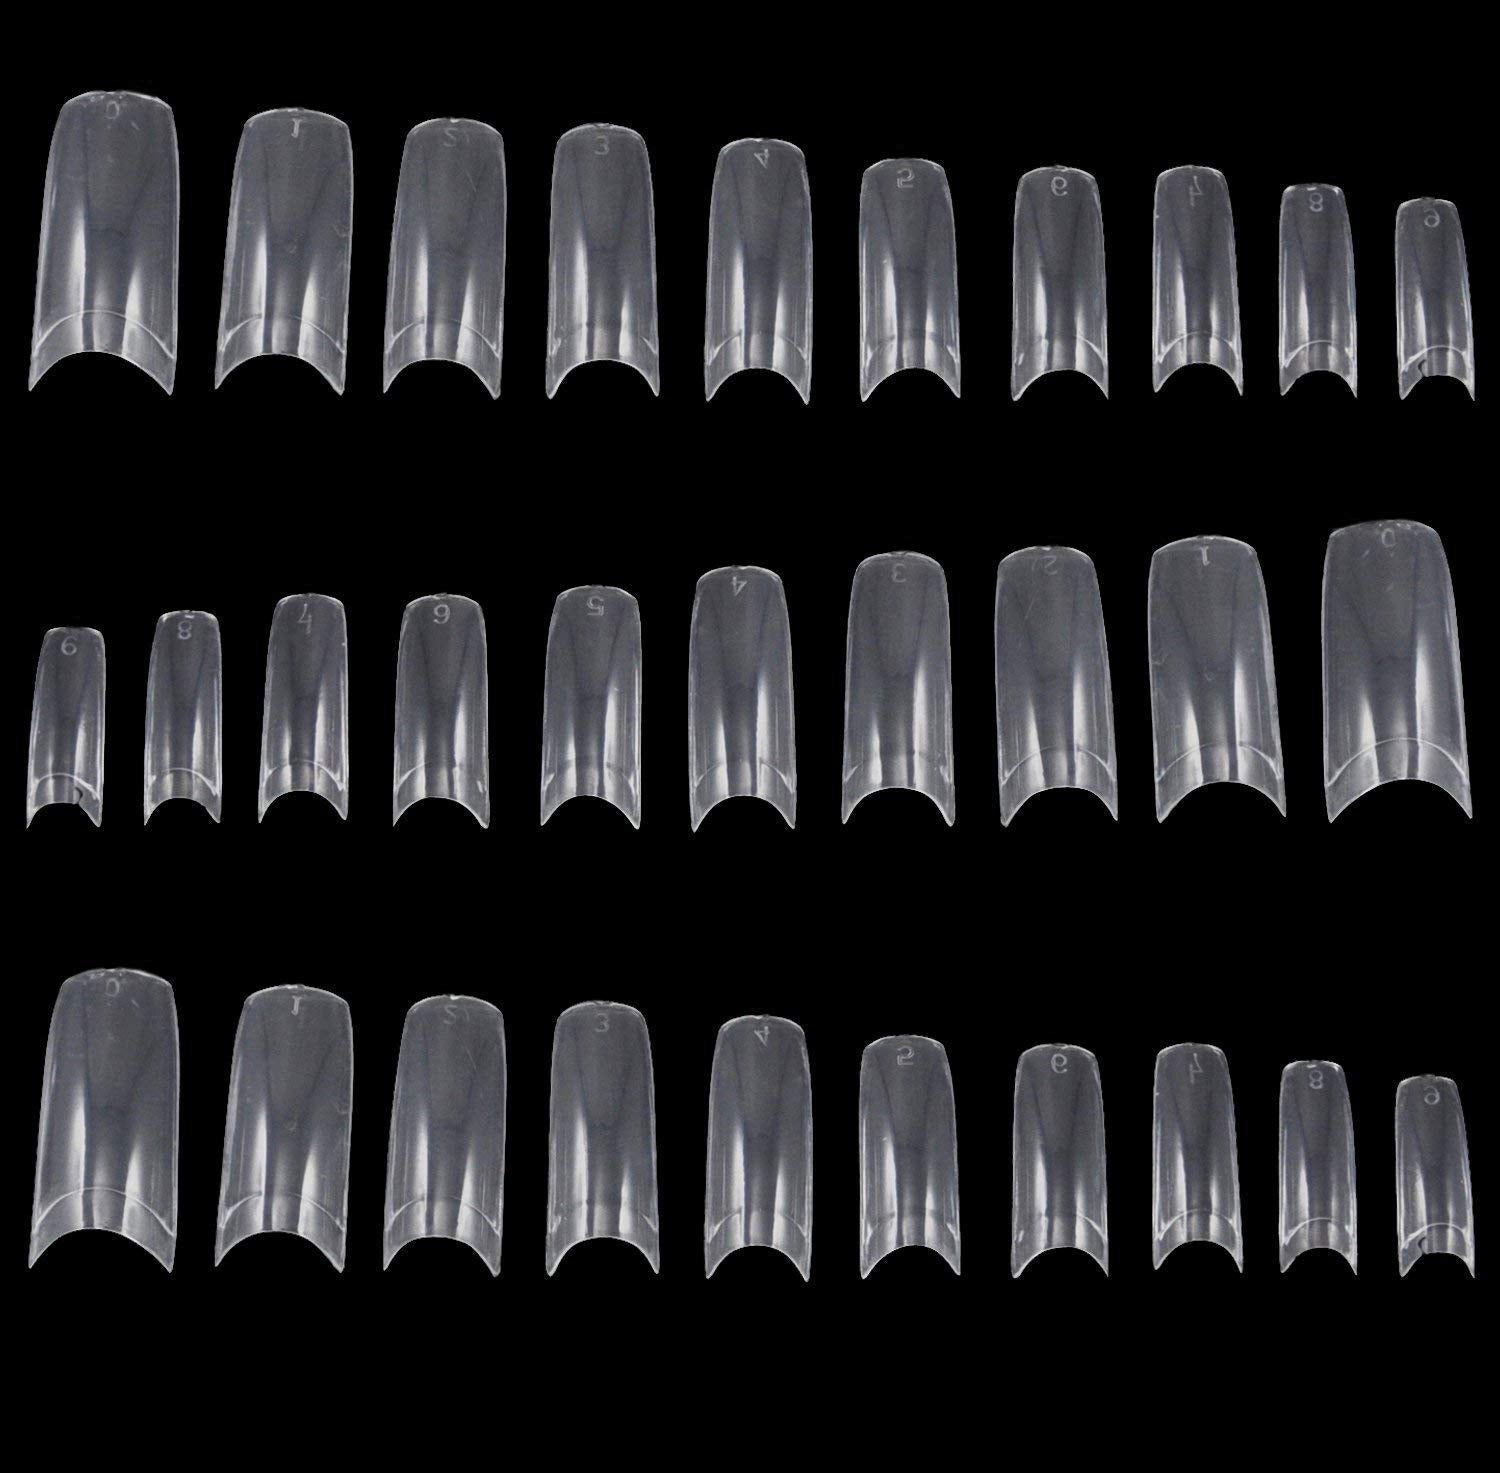 TRIXES 500 x French Nails Clear Acrylic Tips - DIY Manicure Vanish or Gel Extension 10 Sizes